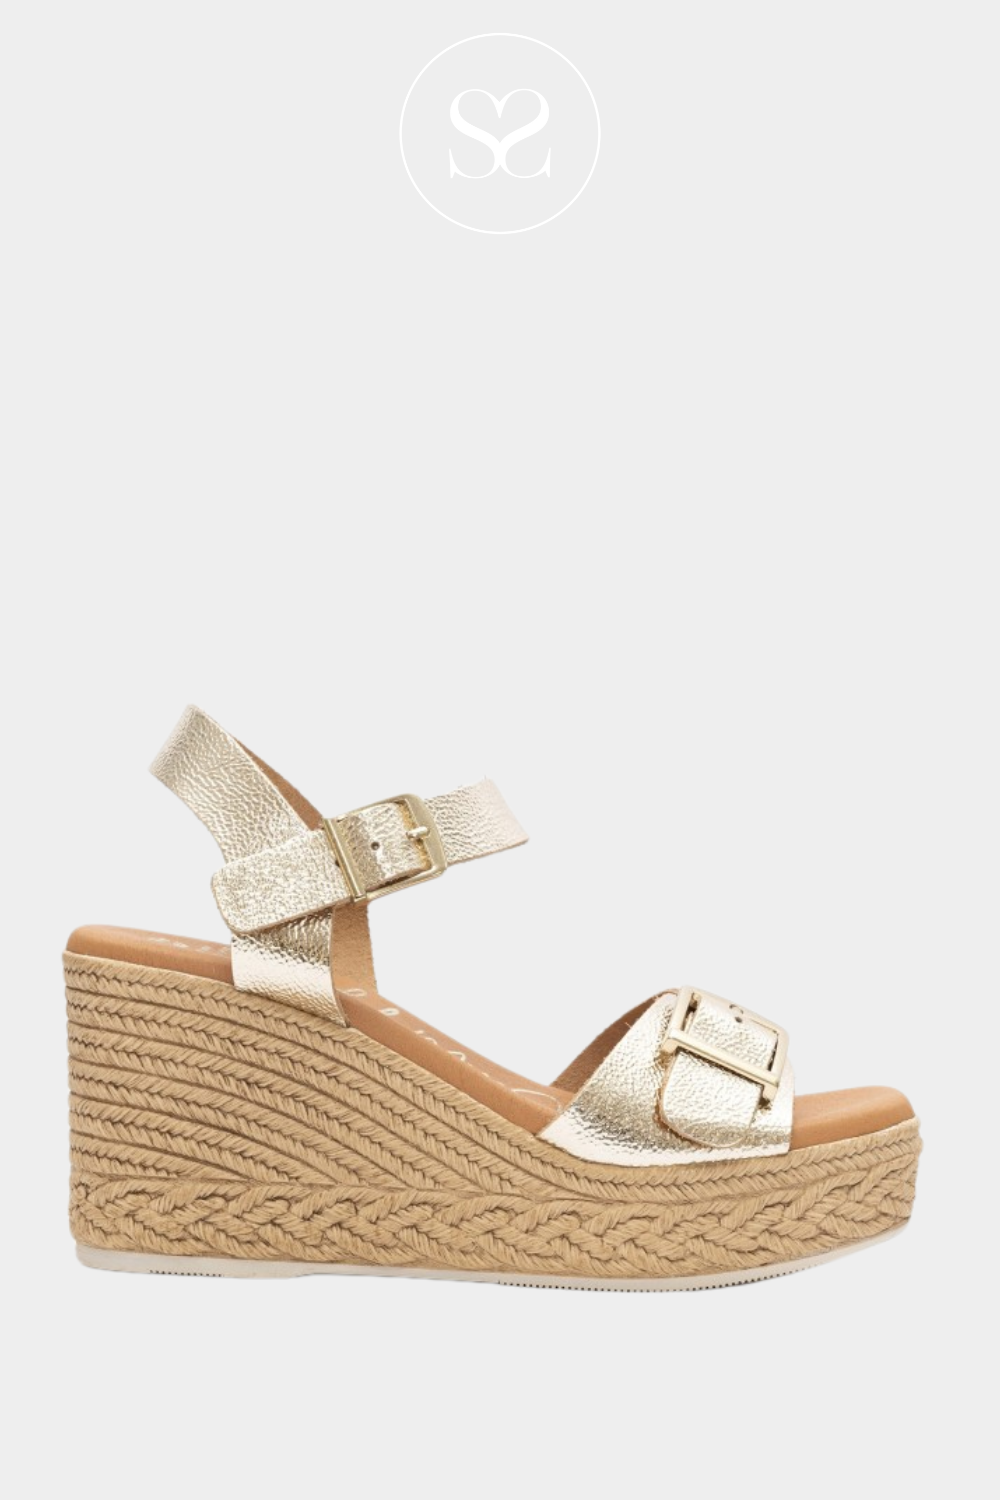 OH MY SANDALS 5459 GOLD LEATHER WEDGE PLATFORM SOLE SANDALS WITH ADJUSTABLE ANKLE STRAP AND WIDE STRAP ACROSS THE FOOT. ESPADRILLE SOLE